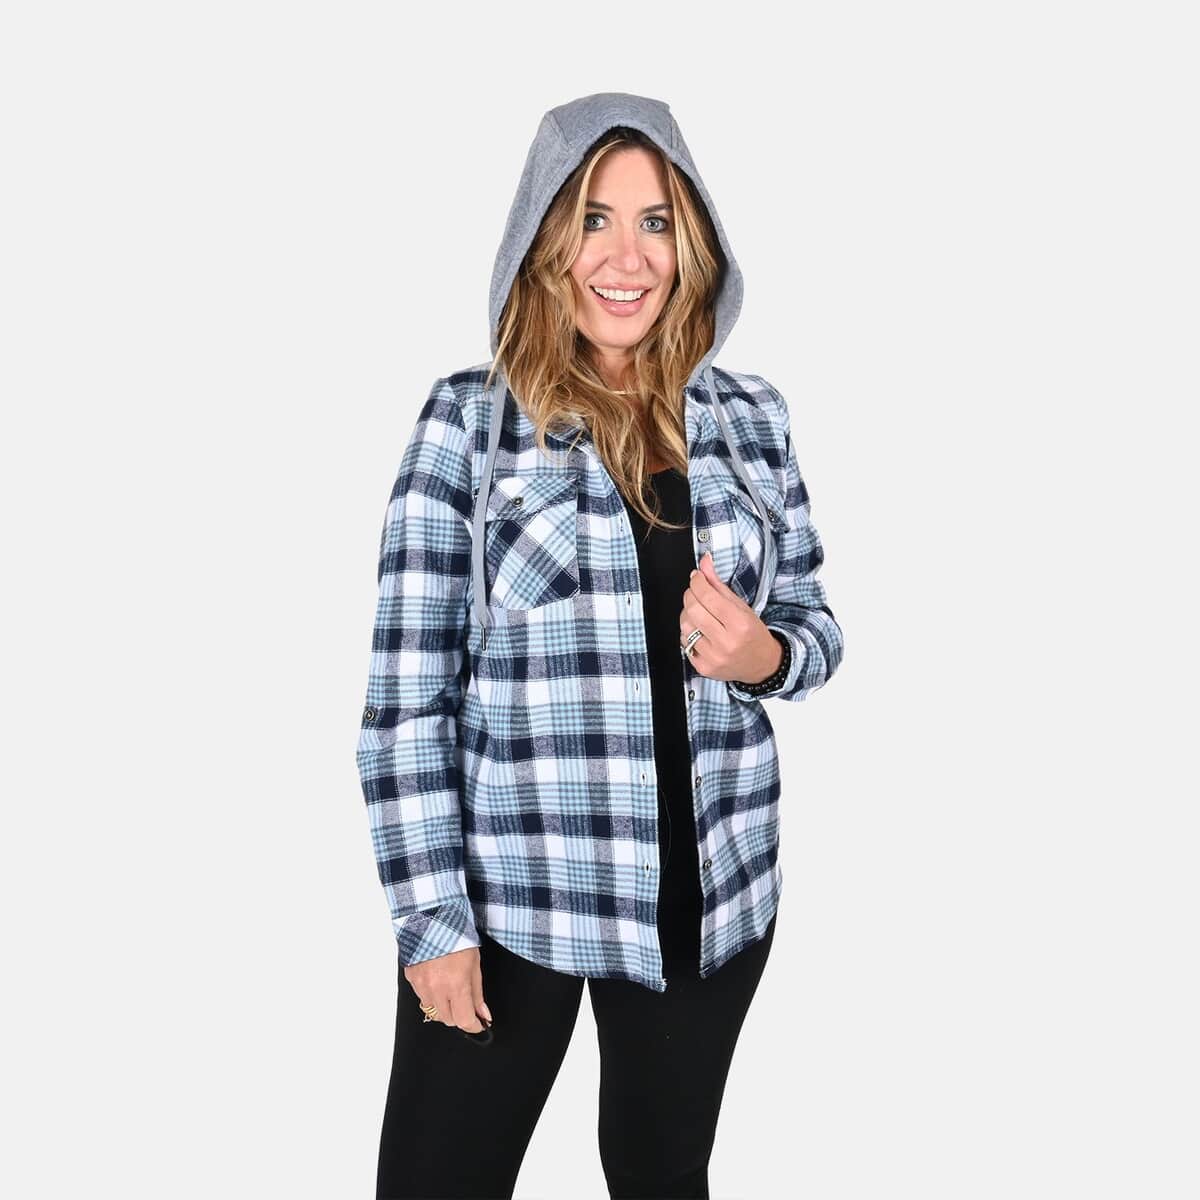 Victory Sportswear Blue and White Plaid Pattern Cotton Shirt with Fleece Hood -L image number 3